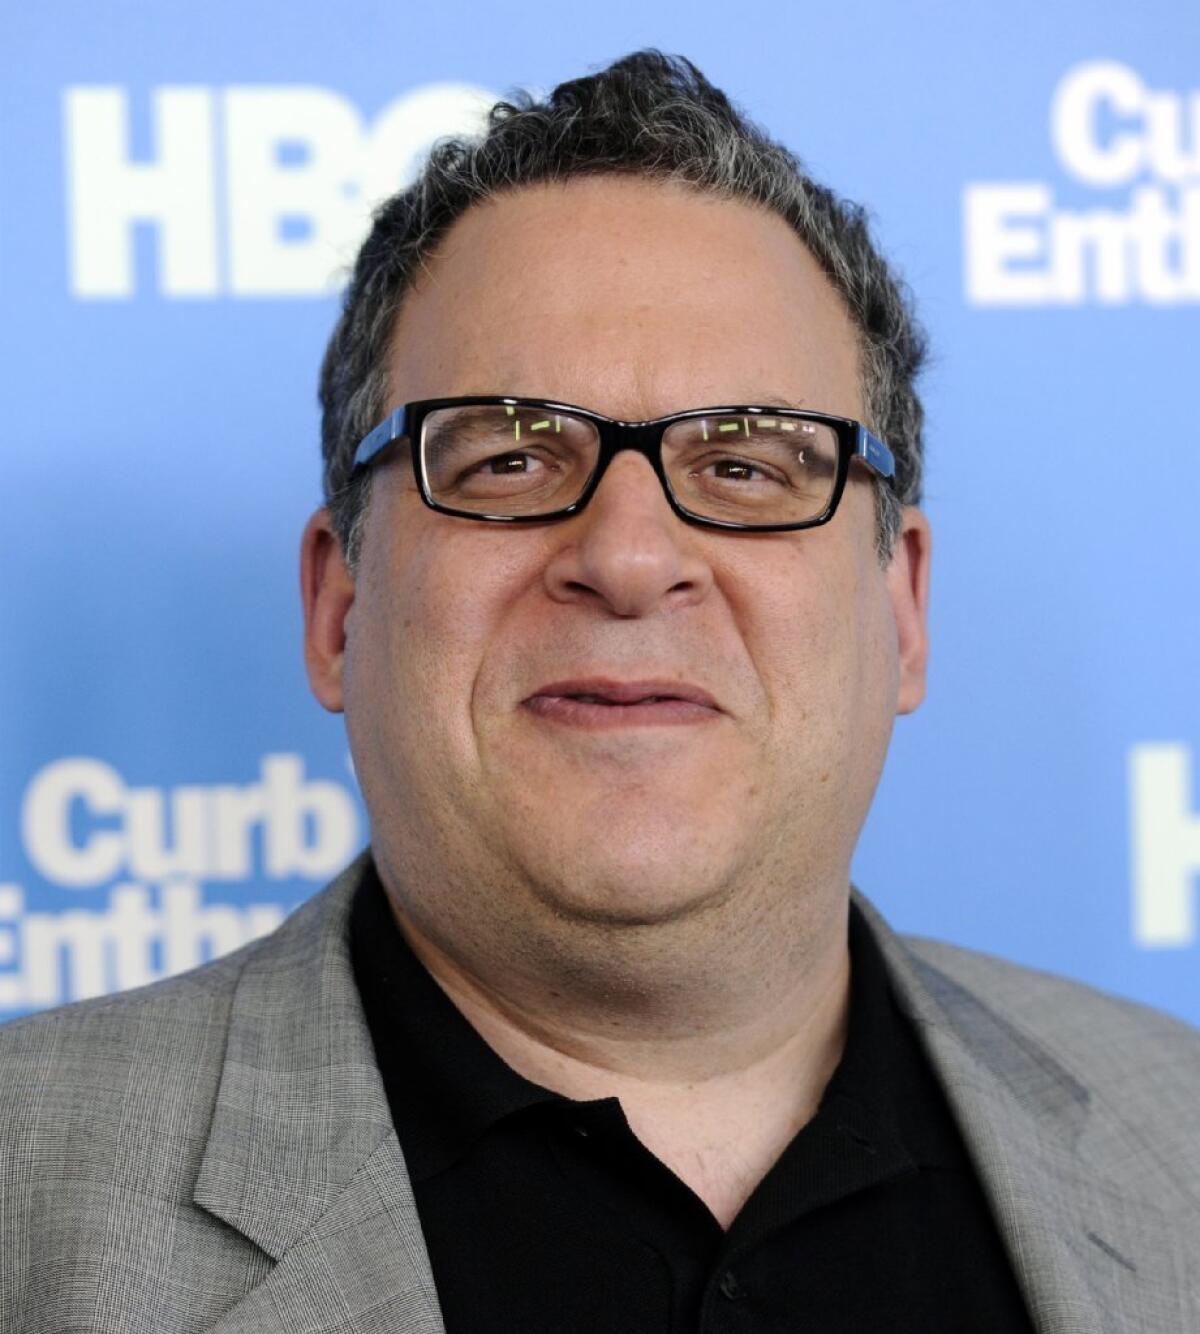 Jeff Garlin, who plays Larry David's manager on "Curb Your Enthusiasm," is in hot water after a parking dispute.